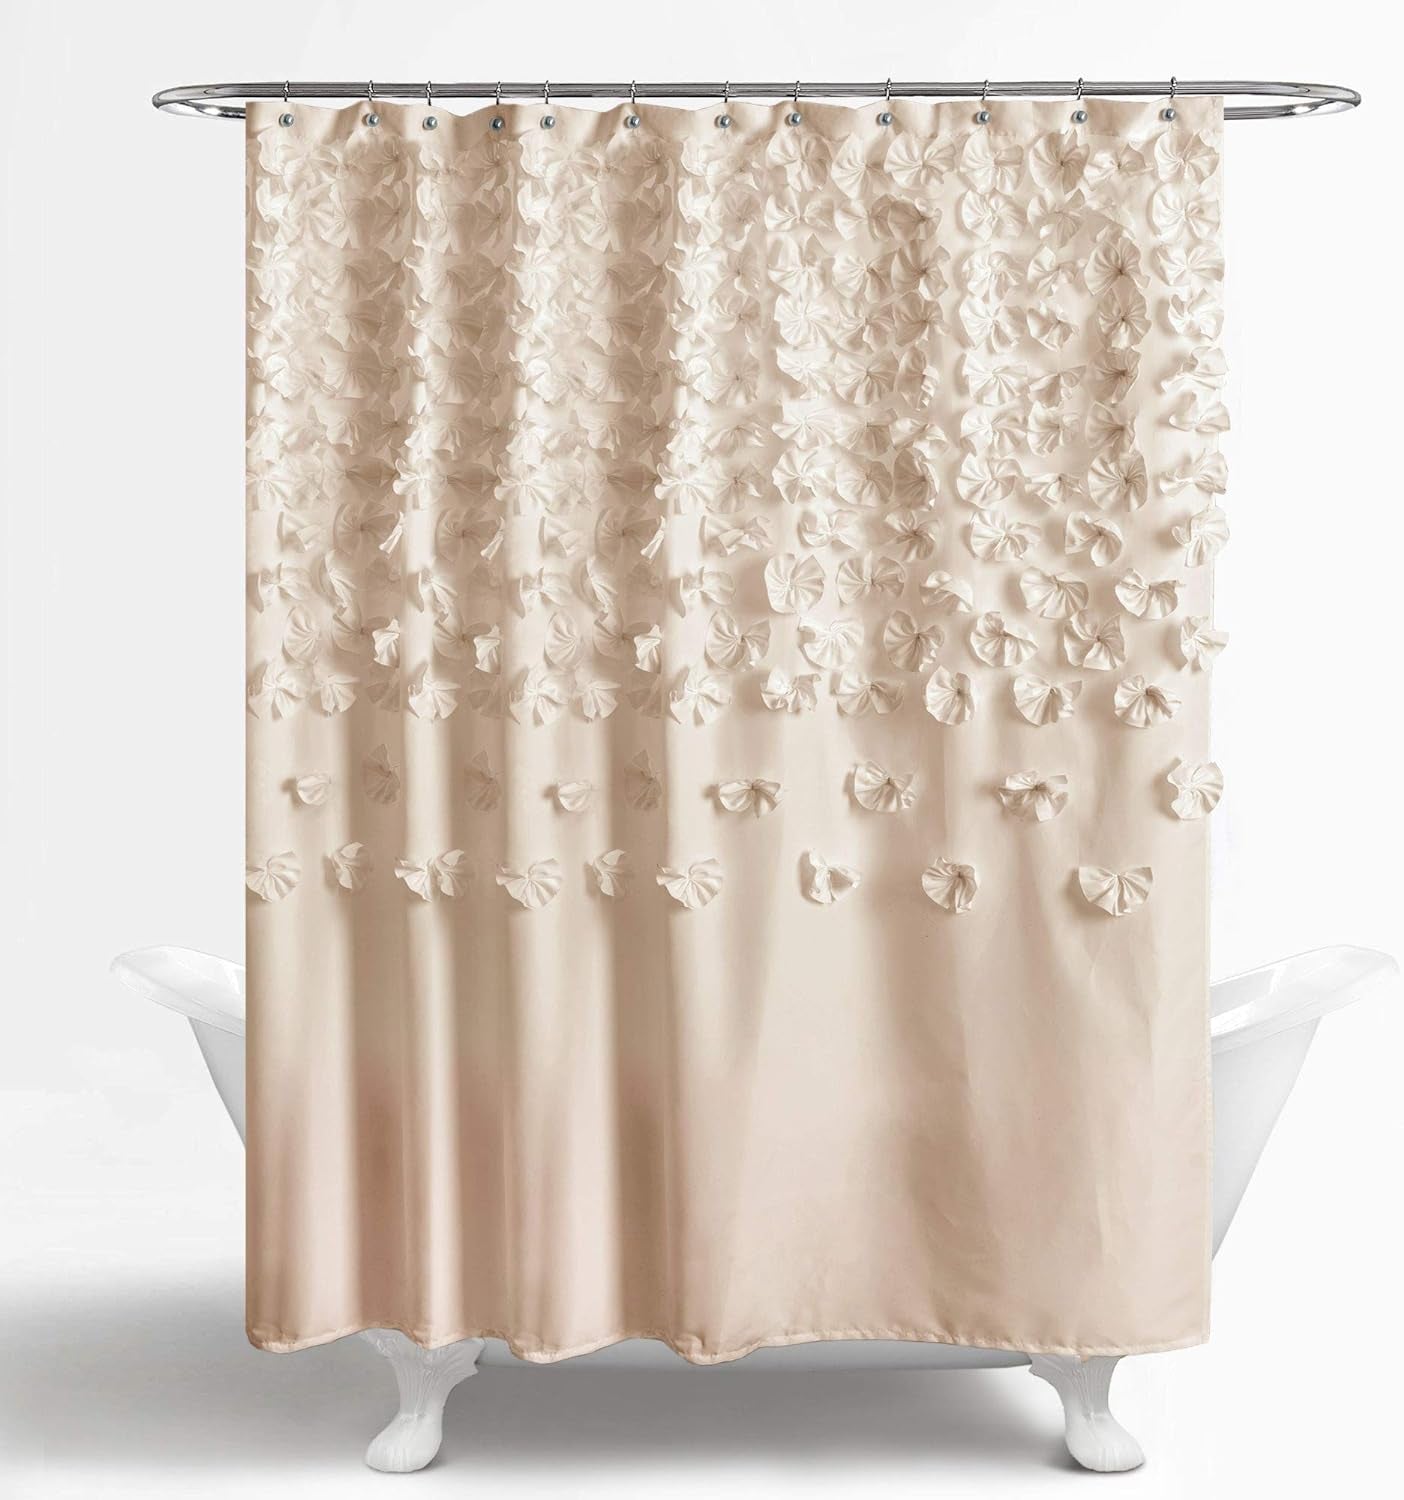 Lush Decor Lucia Shower Curtain - Fabric, Ruched, Floral, Textured Vintage Chic, Farmhouse Style Design, 72” X 72”, Ivory